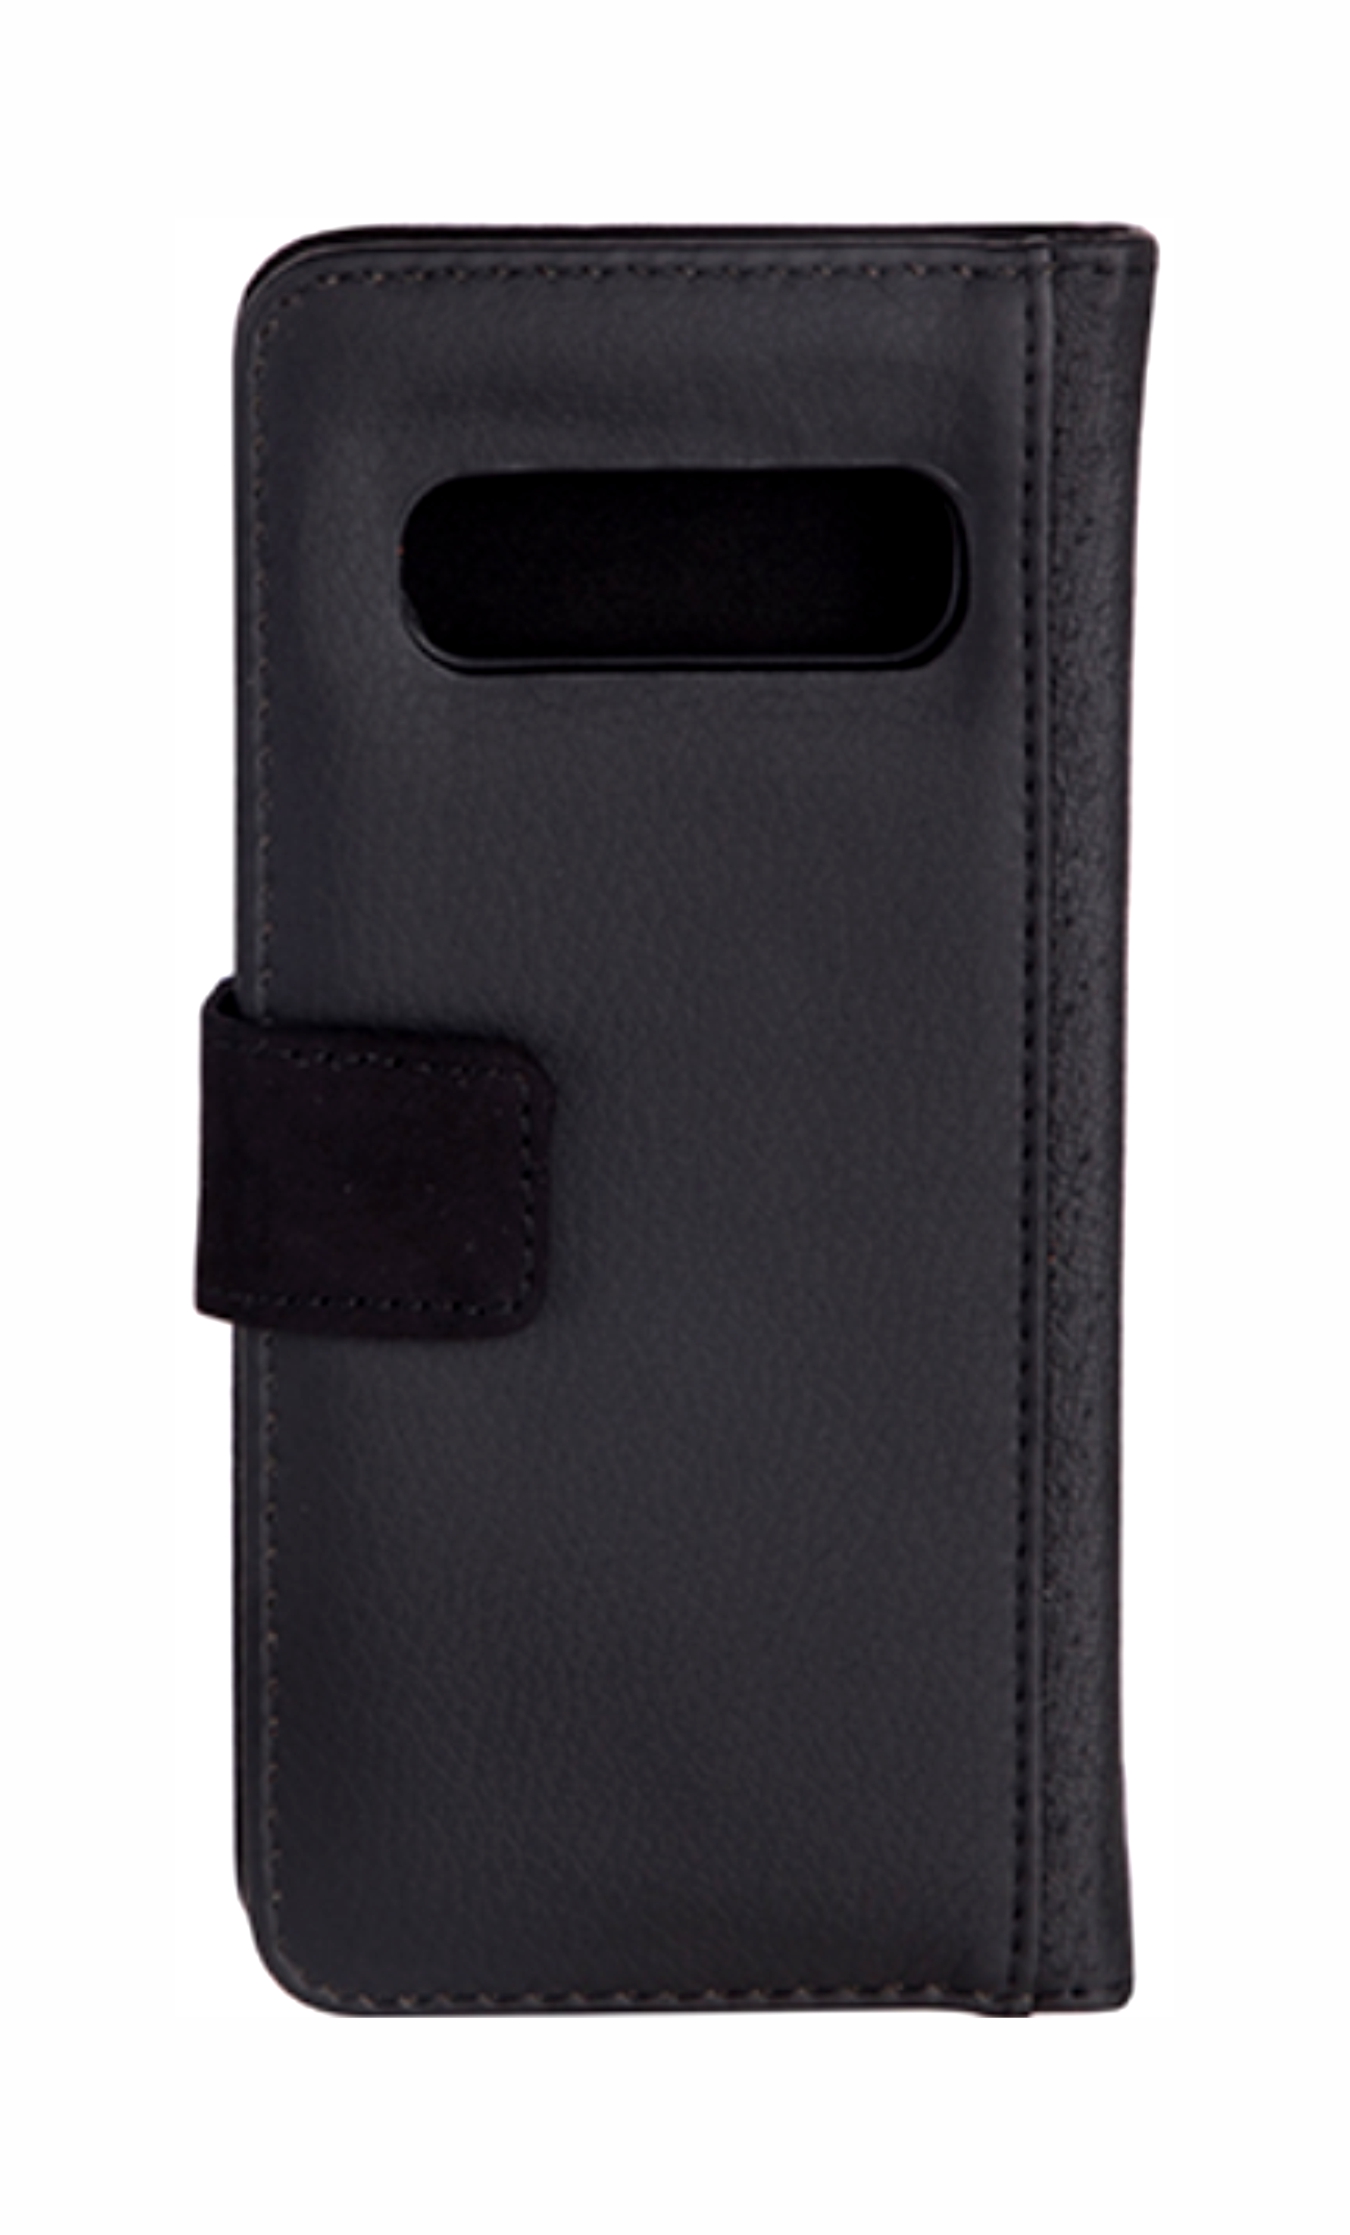 Soccer Court - Galaxy s10 Case Black - Galaxy s10 Case Leather Impression - s10 Wallet Case - s10 Case Card Holder - image 3 of 3